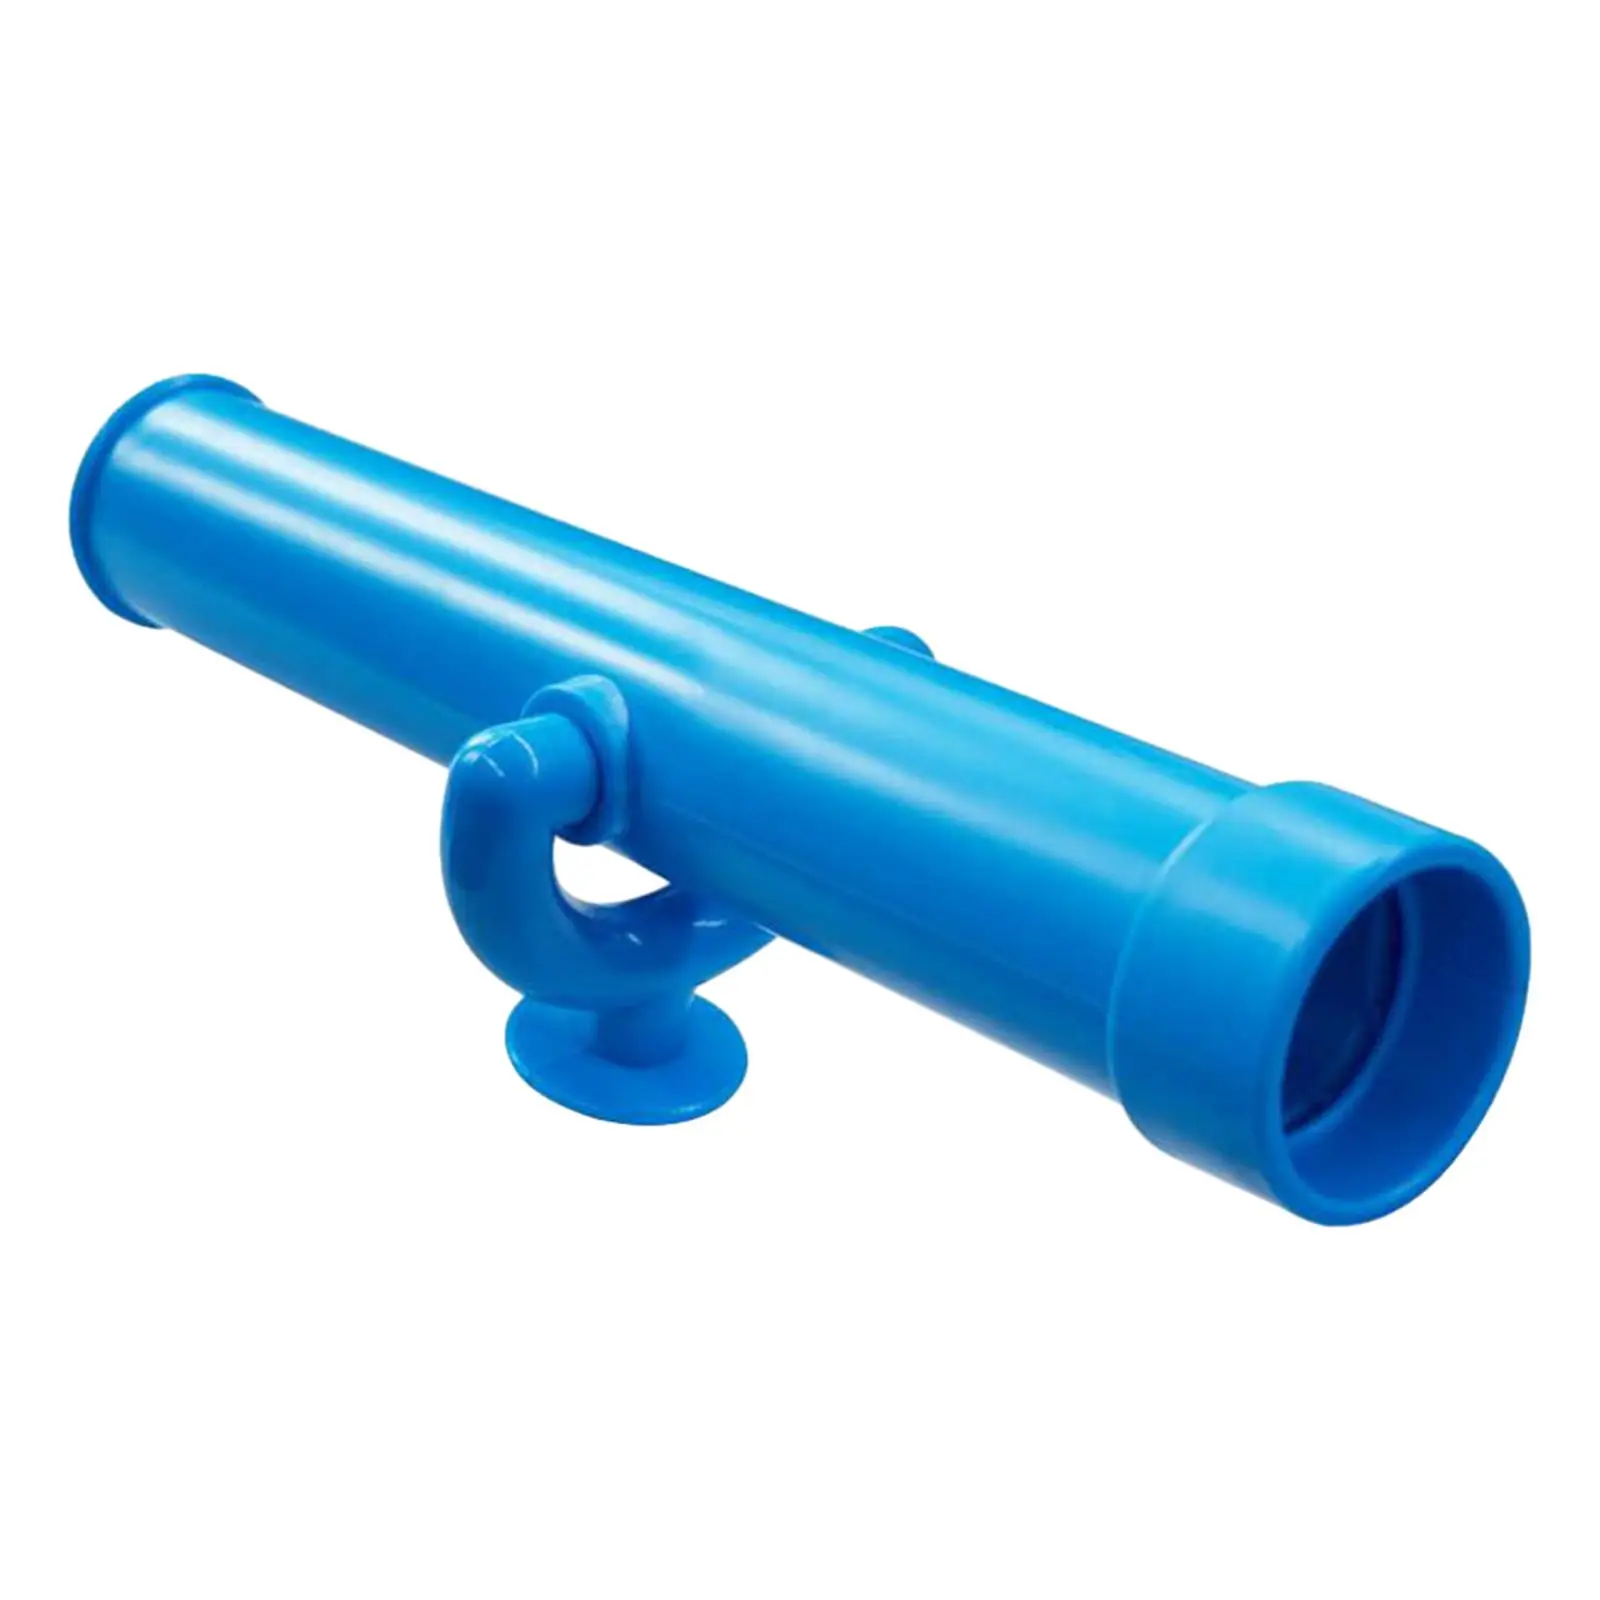 Playground Telescope Toy Playground Accessories Science Toy for Kids Pirate